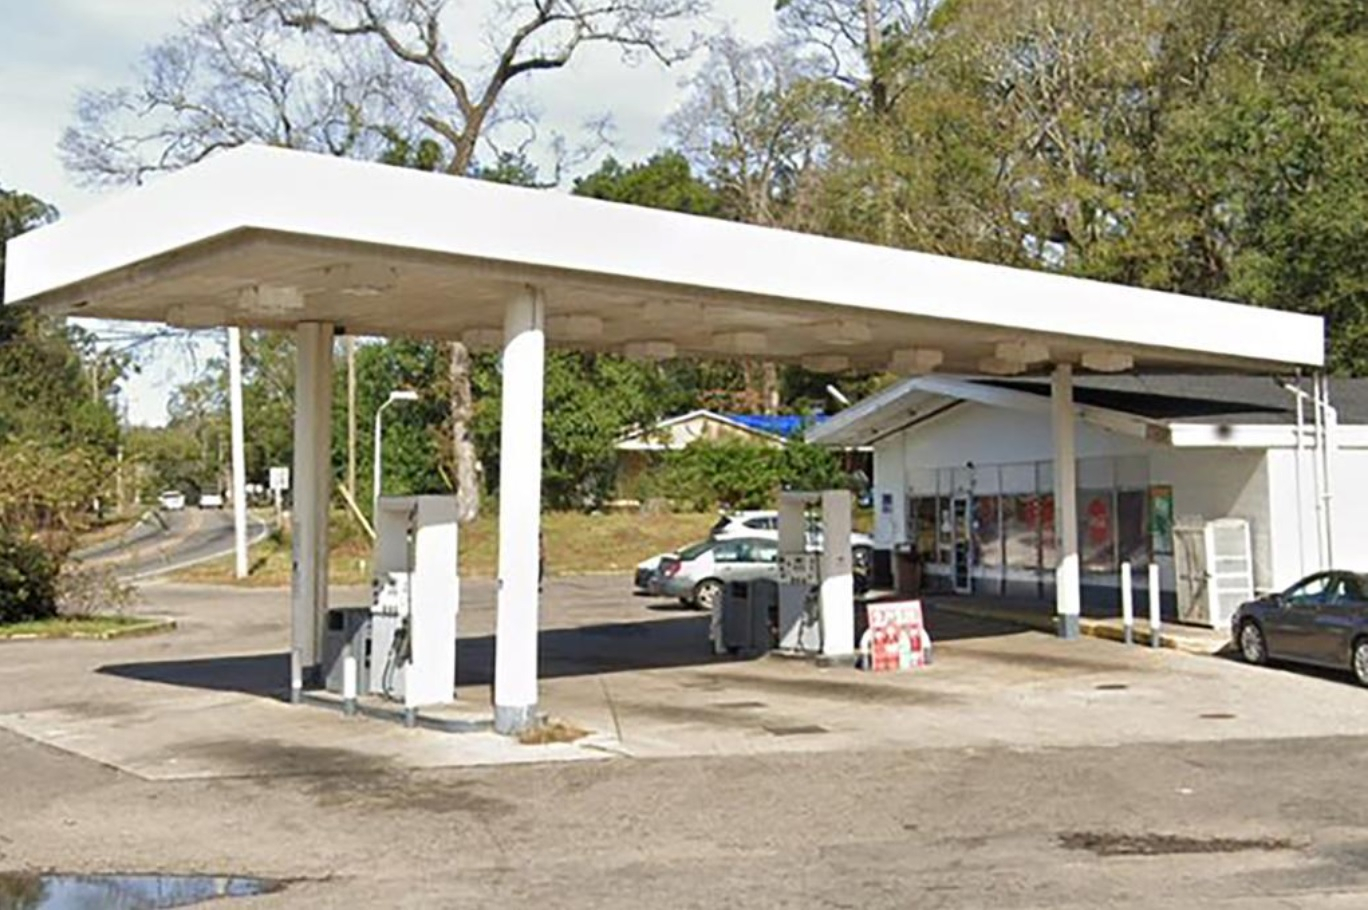 dismembered-human-penis-found-in-parking-lot-of-alabama-gas-station